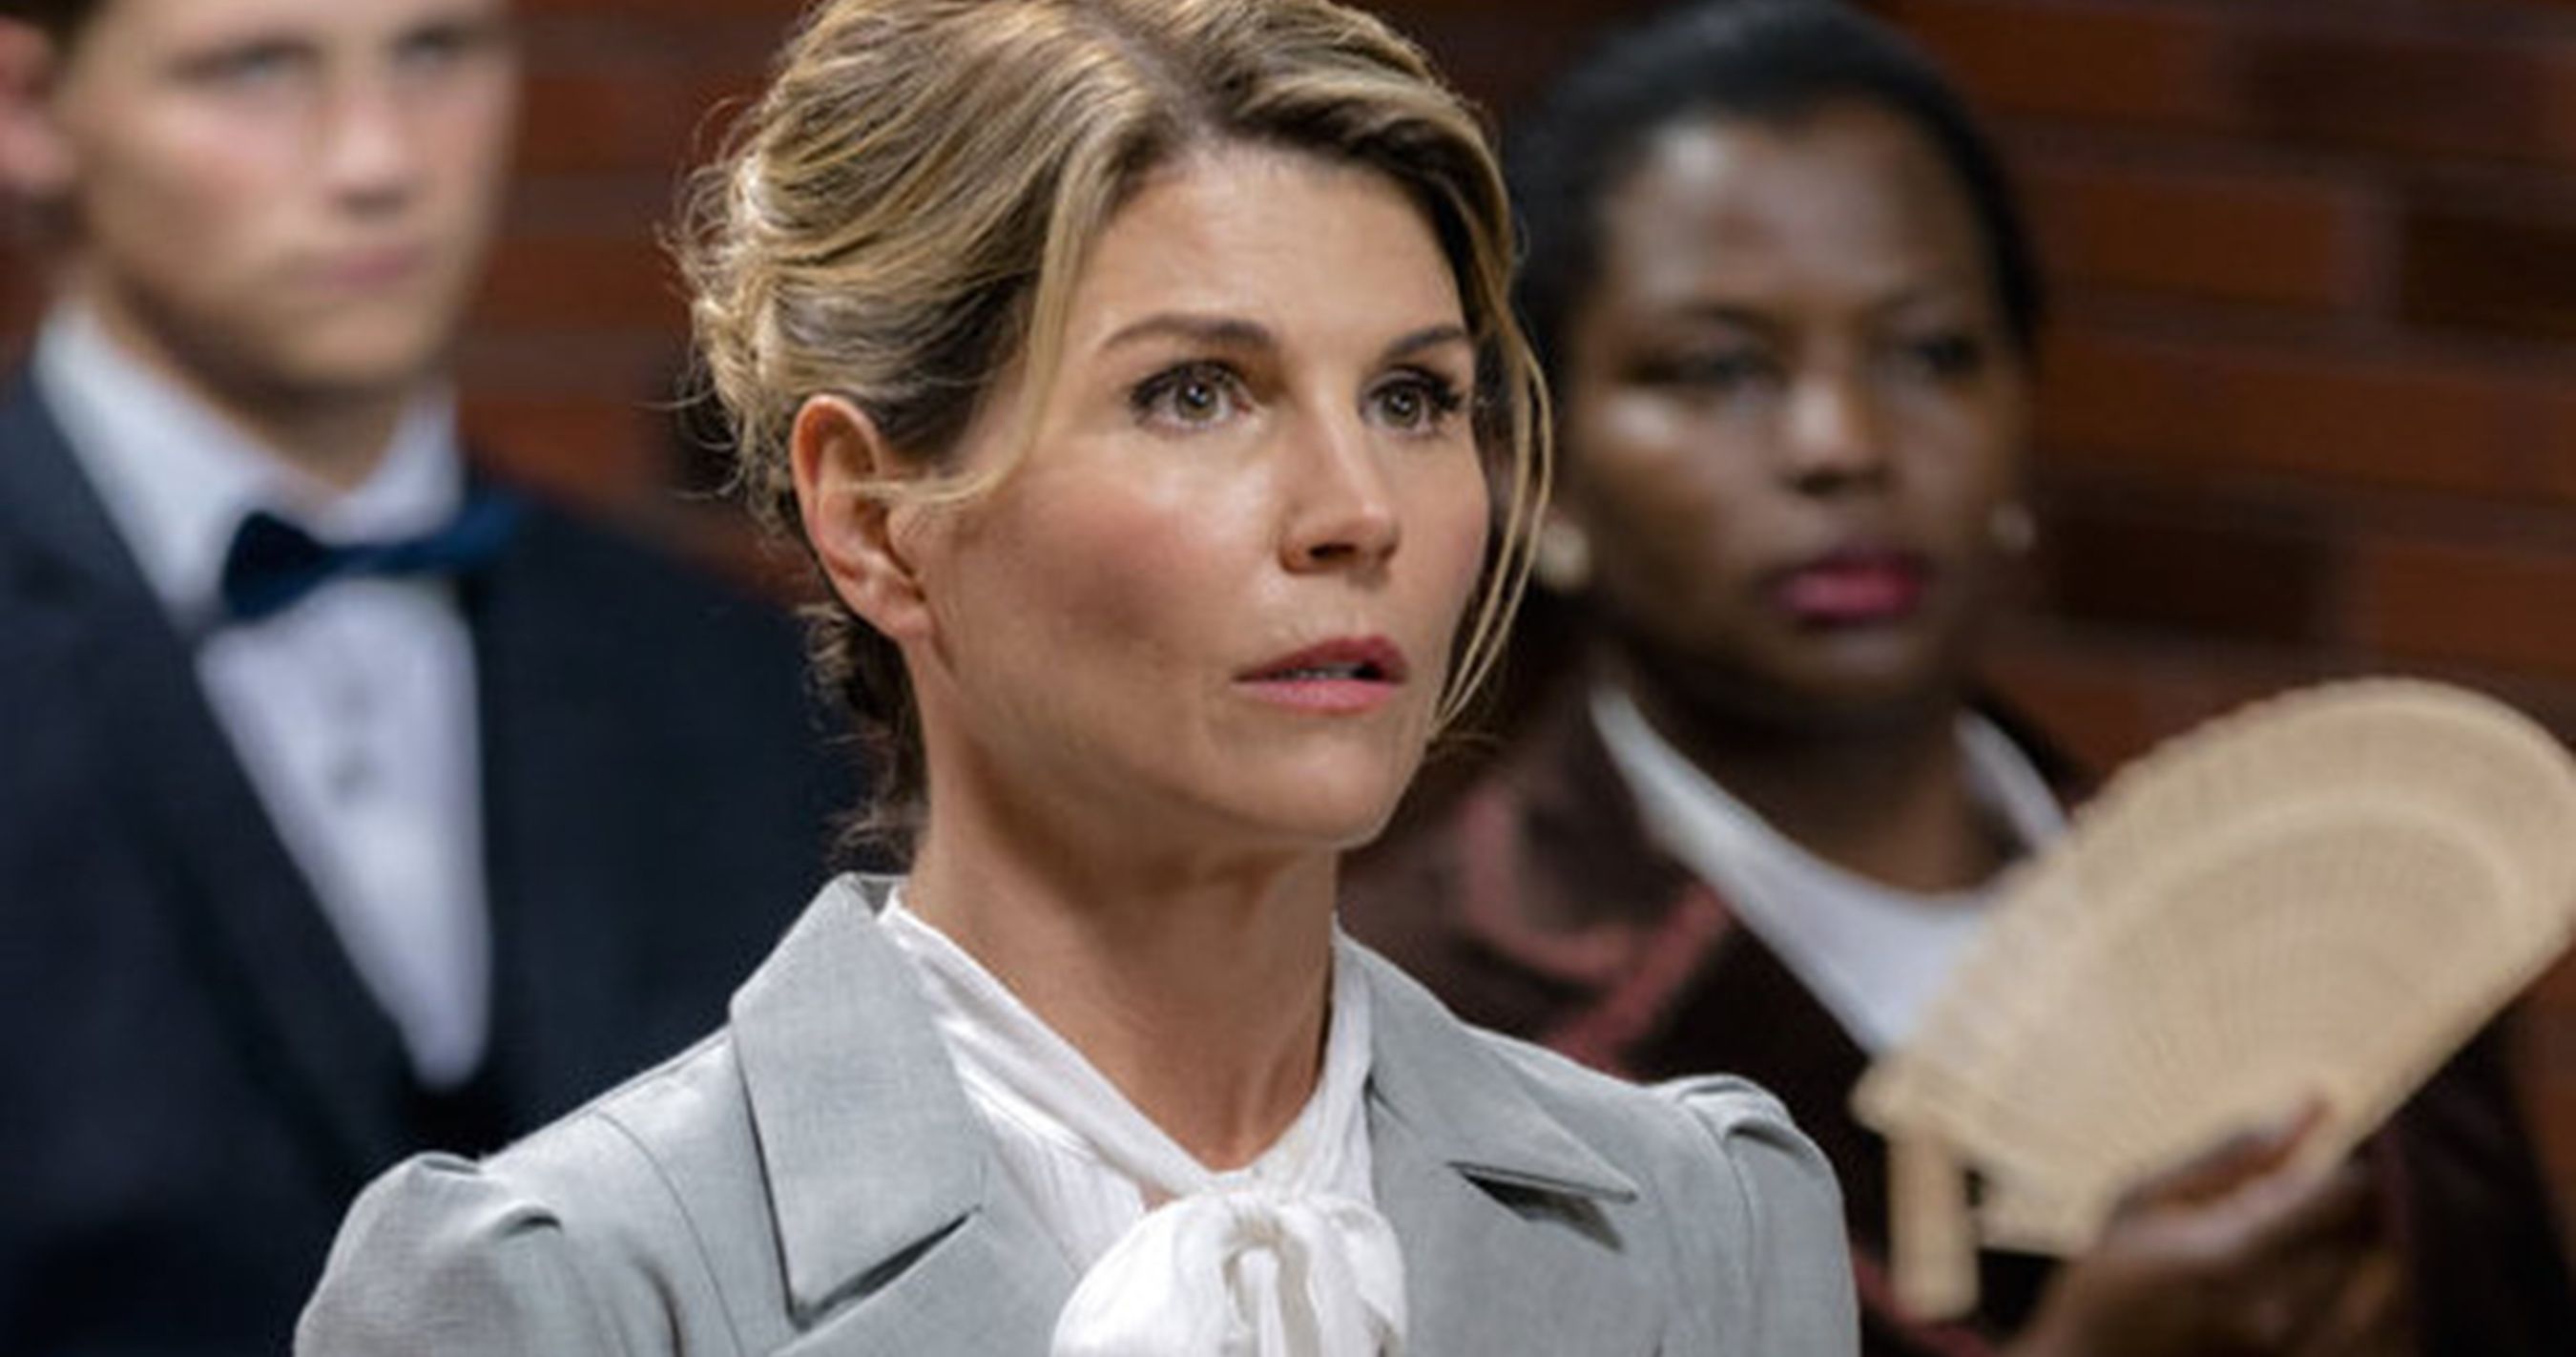 Lori Loughlin Gets Trial Date for College Admissions Scandal